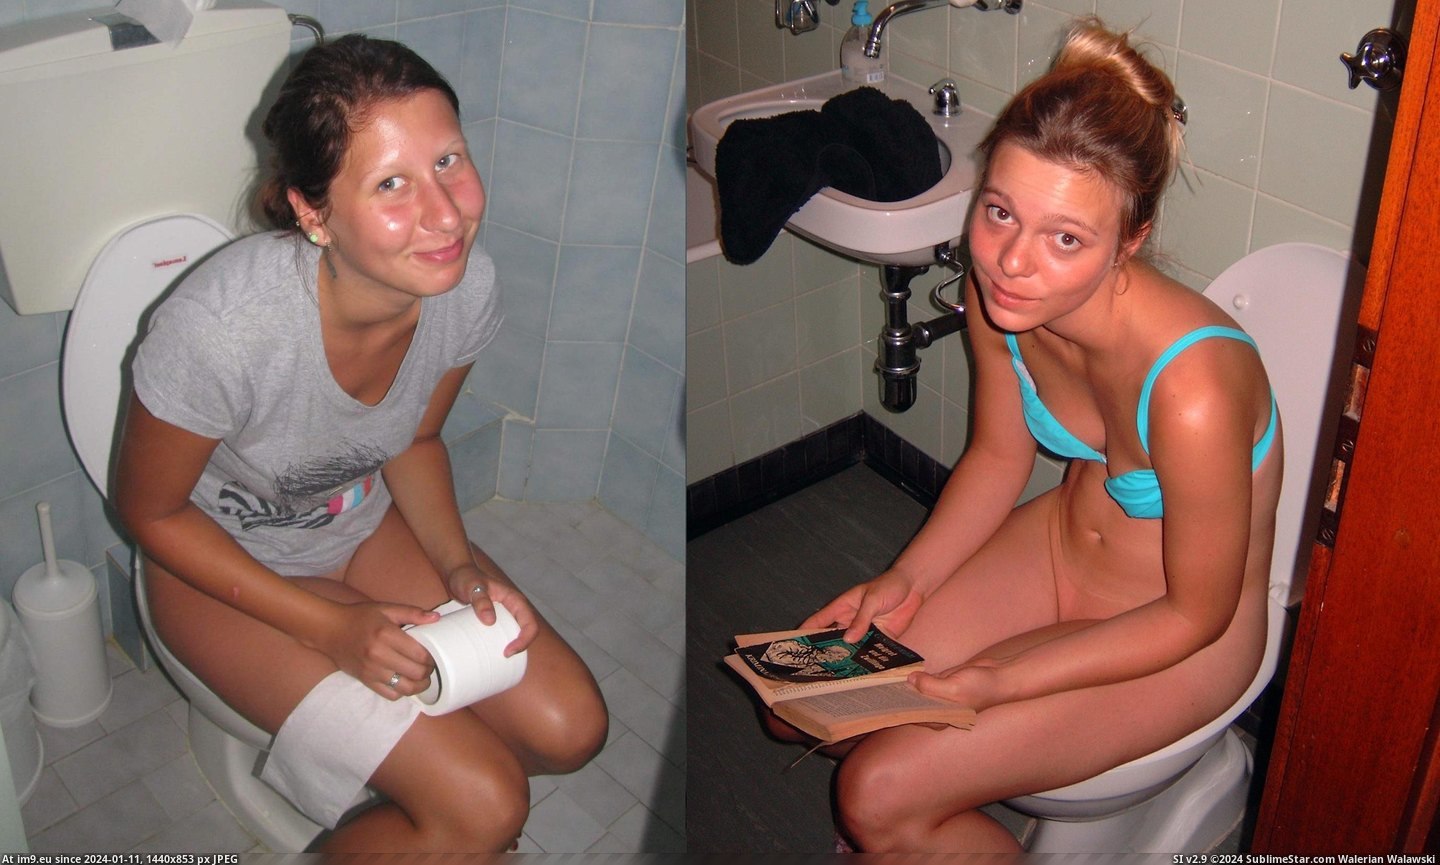 #Hot #Young #Babe #Pose #Alike #Embarassed #Pissing #Bitch #Bath Pose-alike (6) Pic. (Obraz z album lookalike teens))